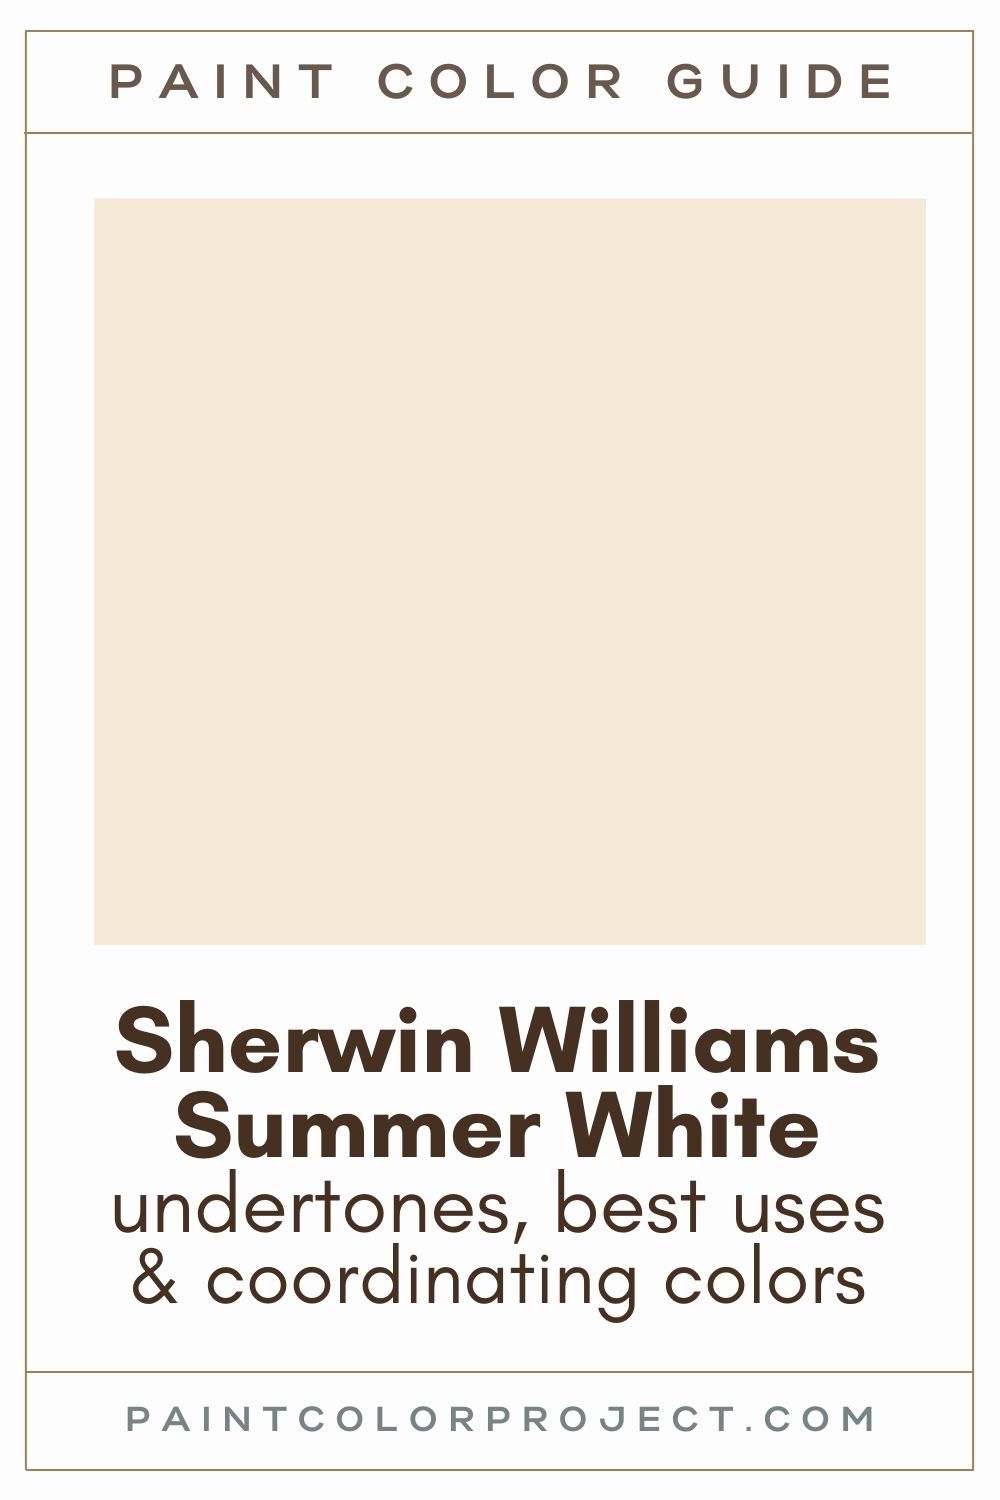 Sherwin Williams Summer White Paint Color Guide.